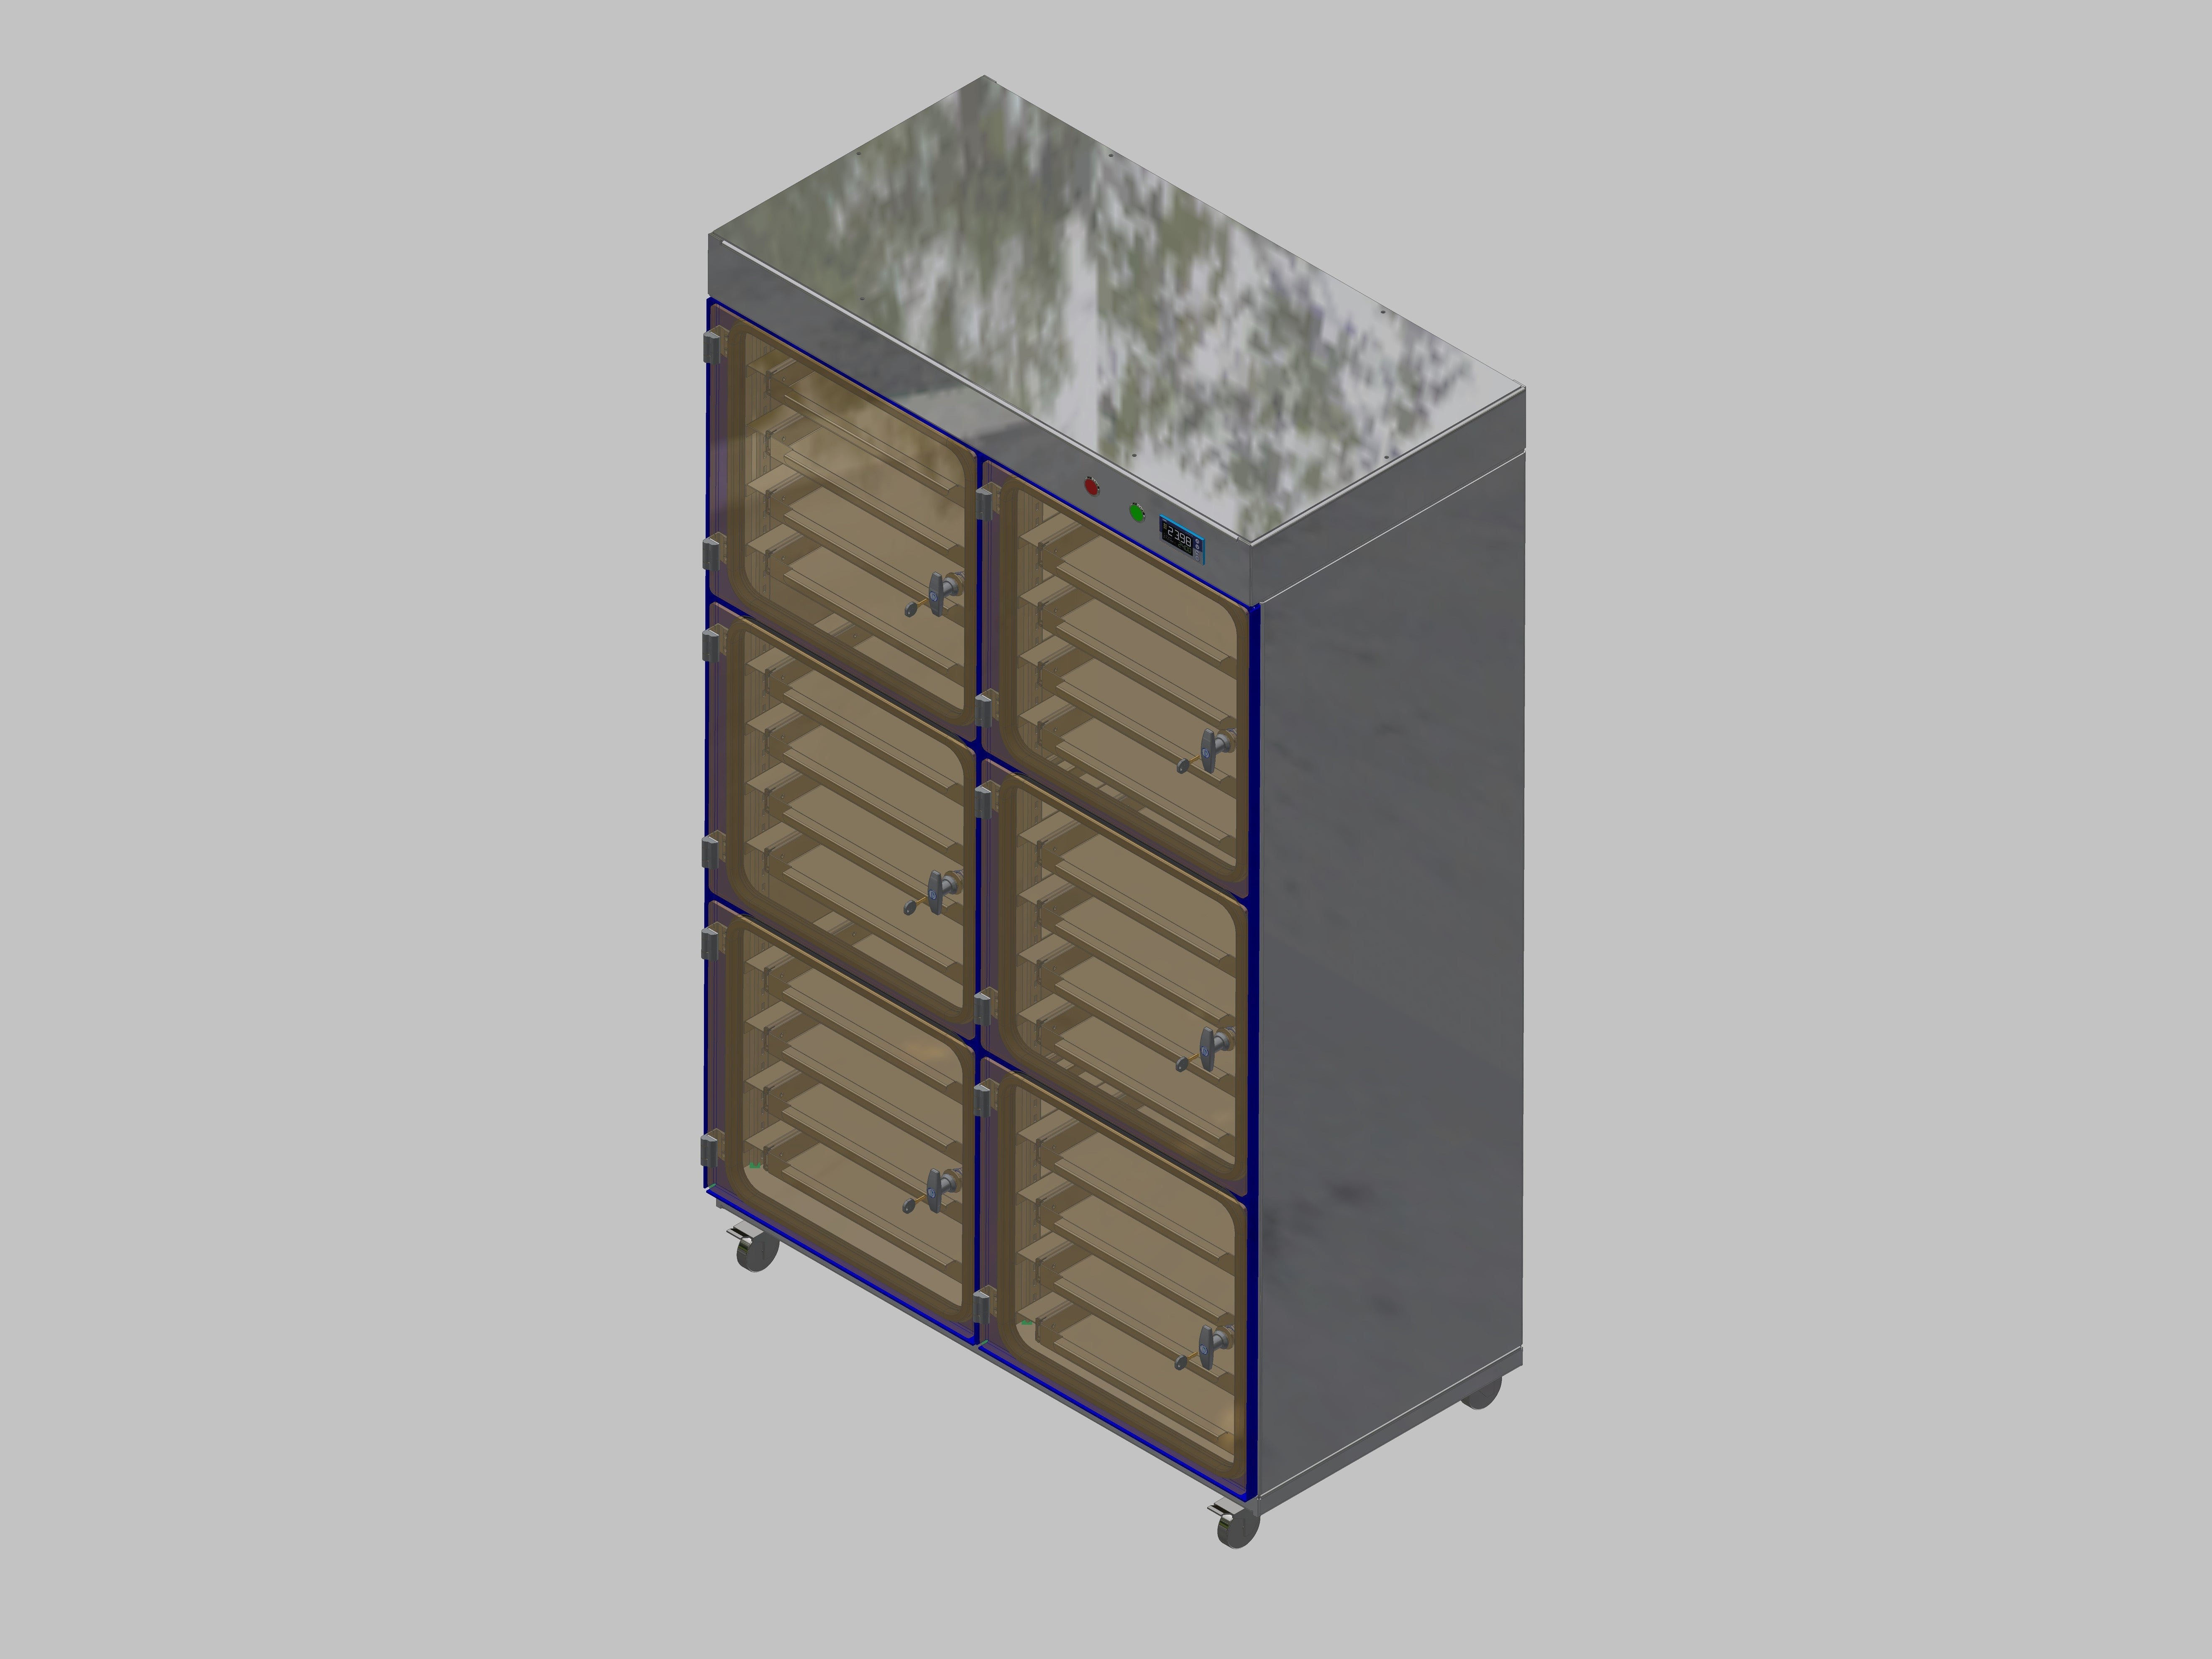 Dry storage cabinet-ITN-1200-6 with 4 drawers per compartment and base design with wheels